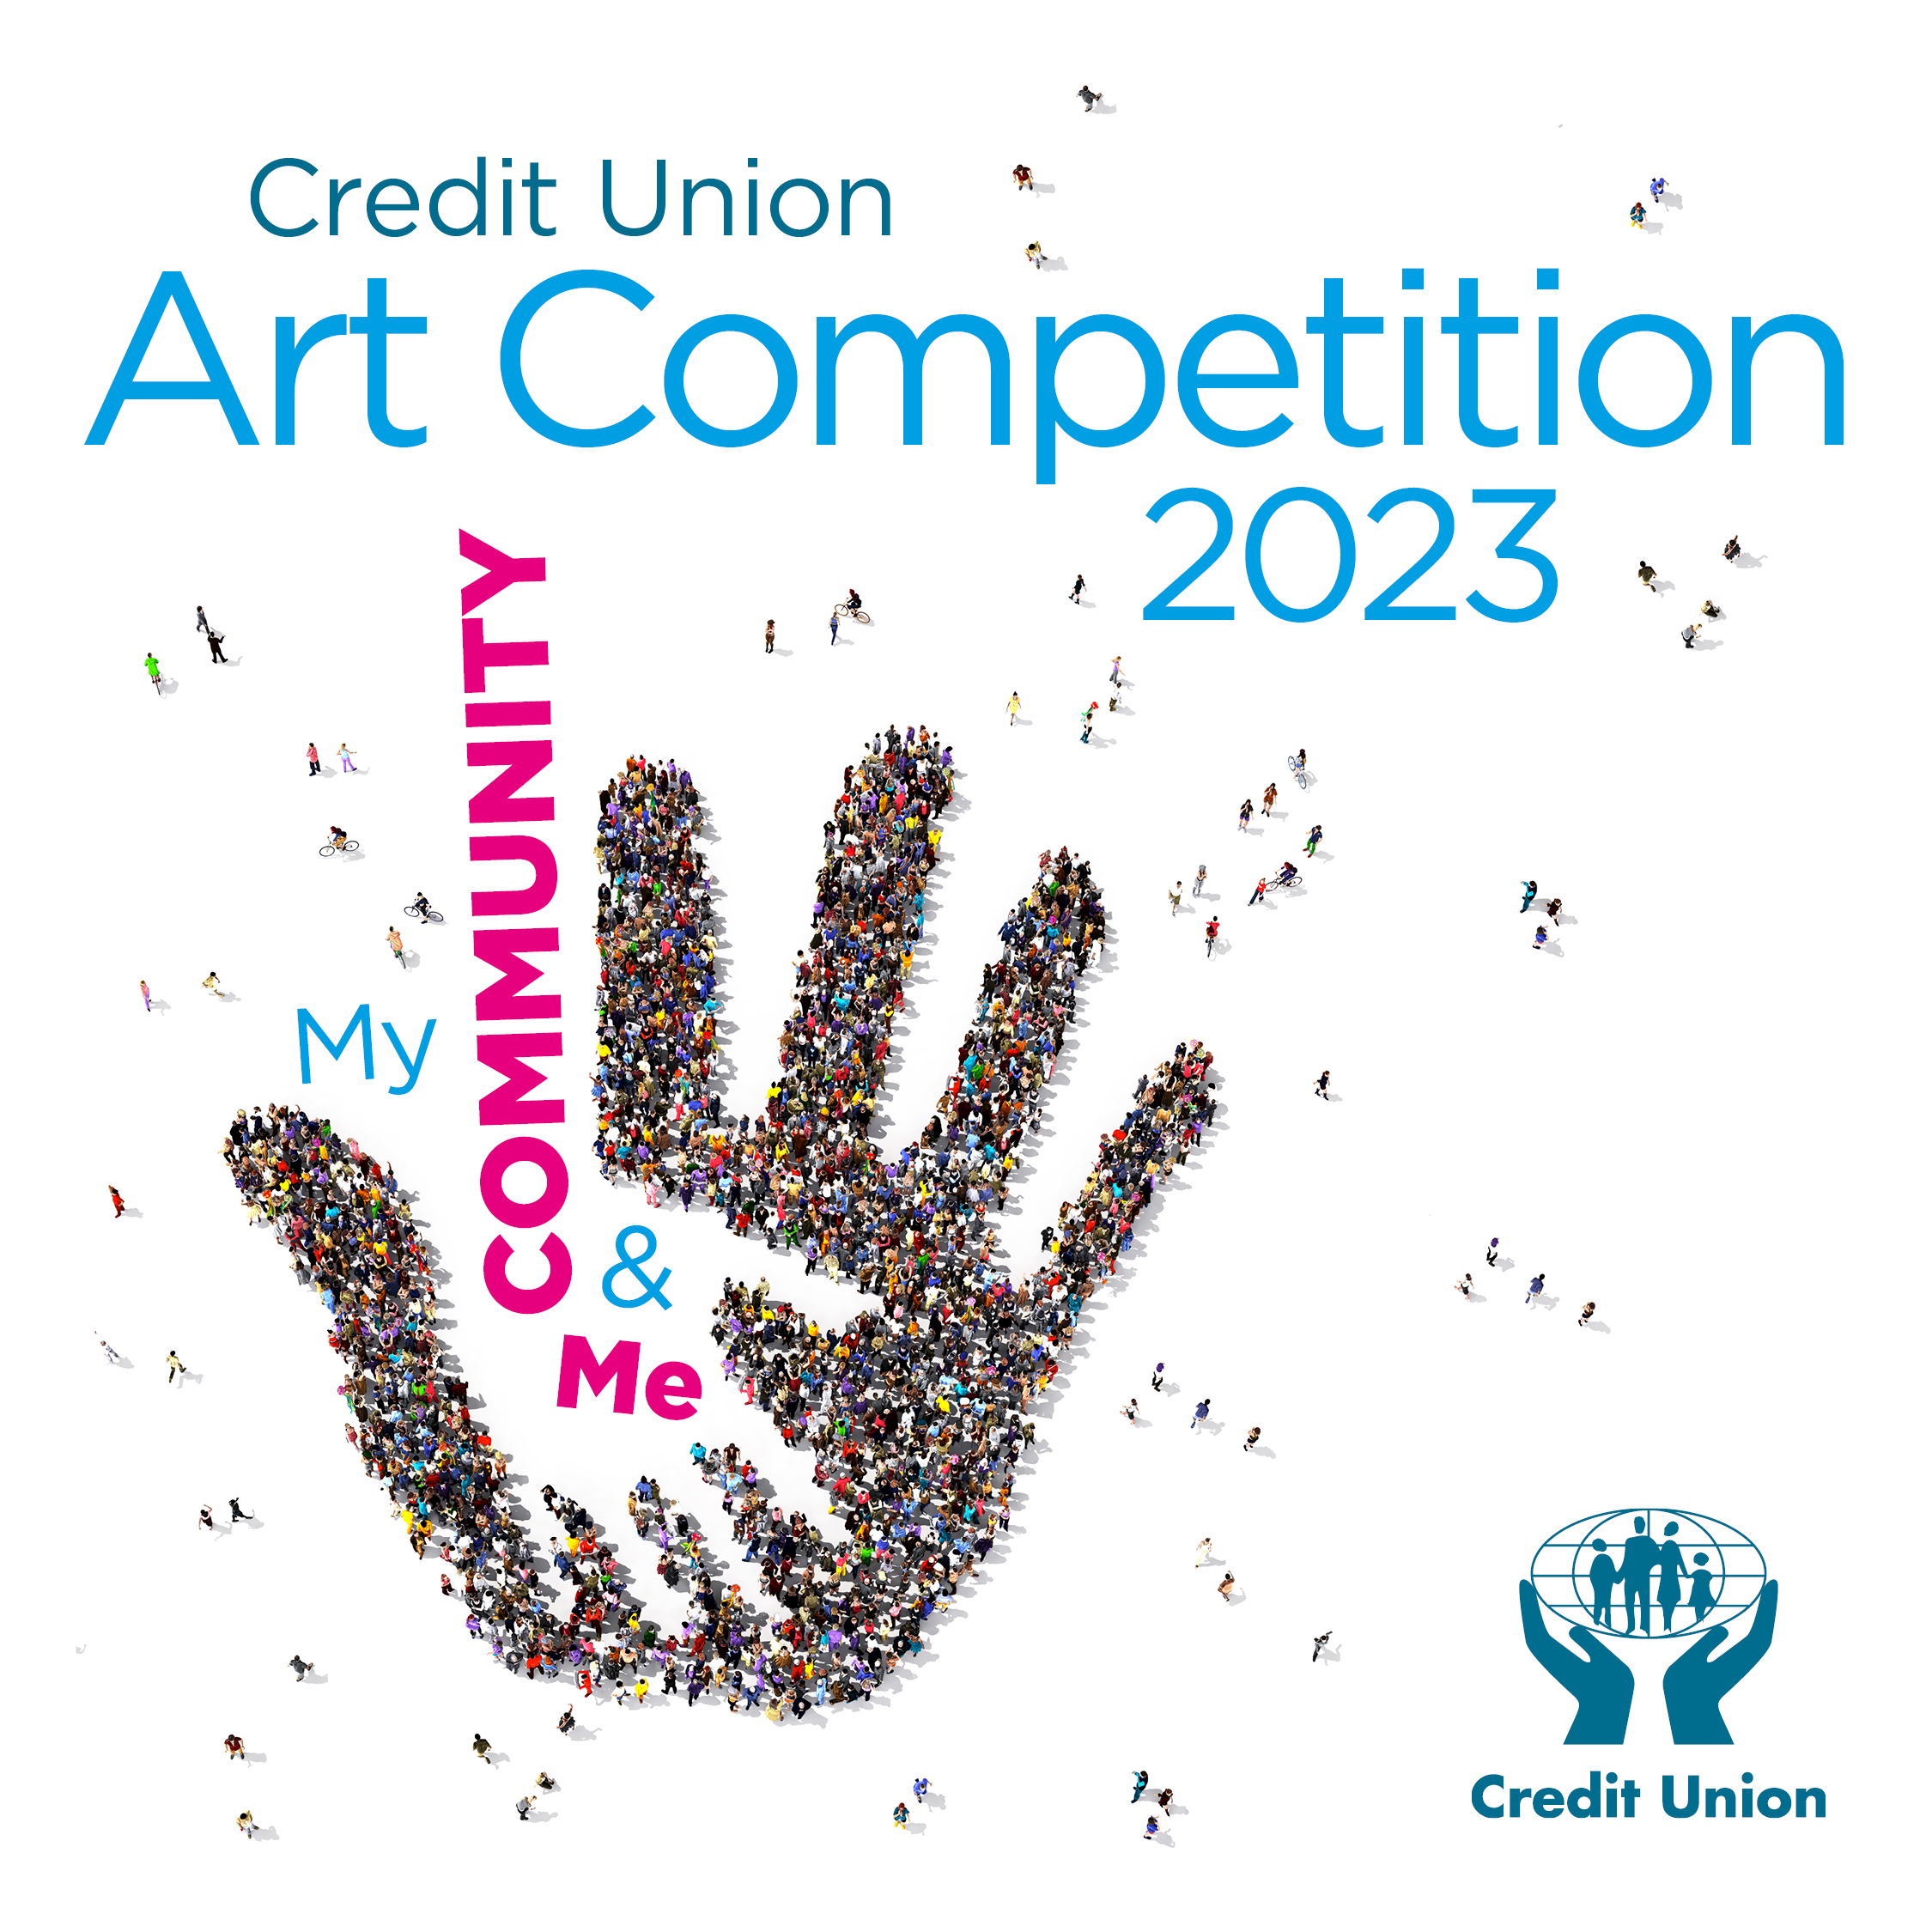 Annual Art Competition Now Open